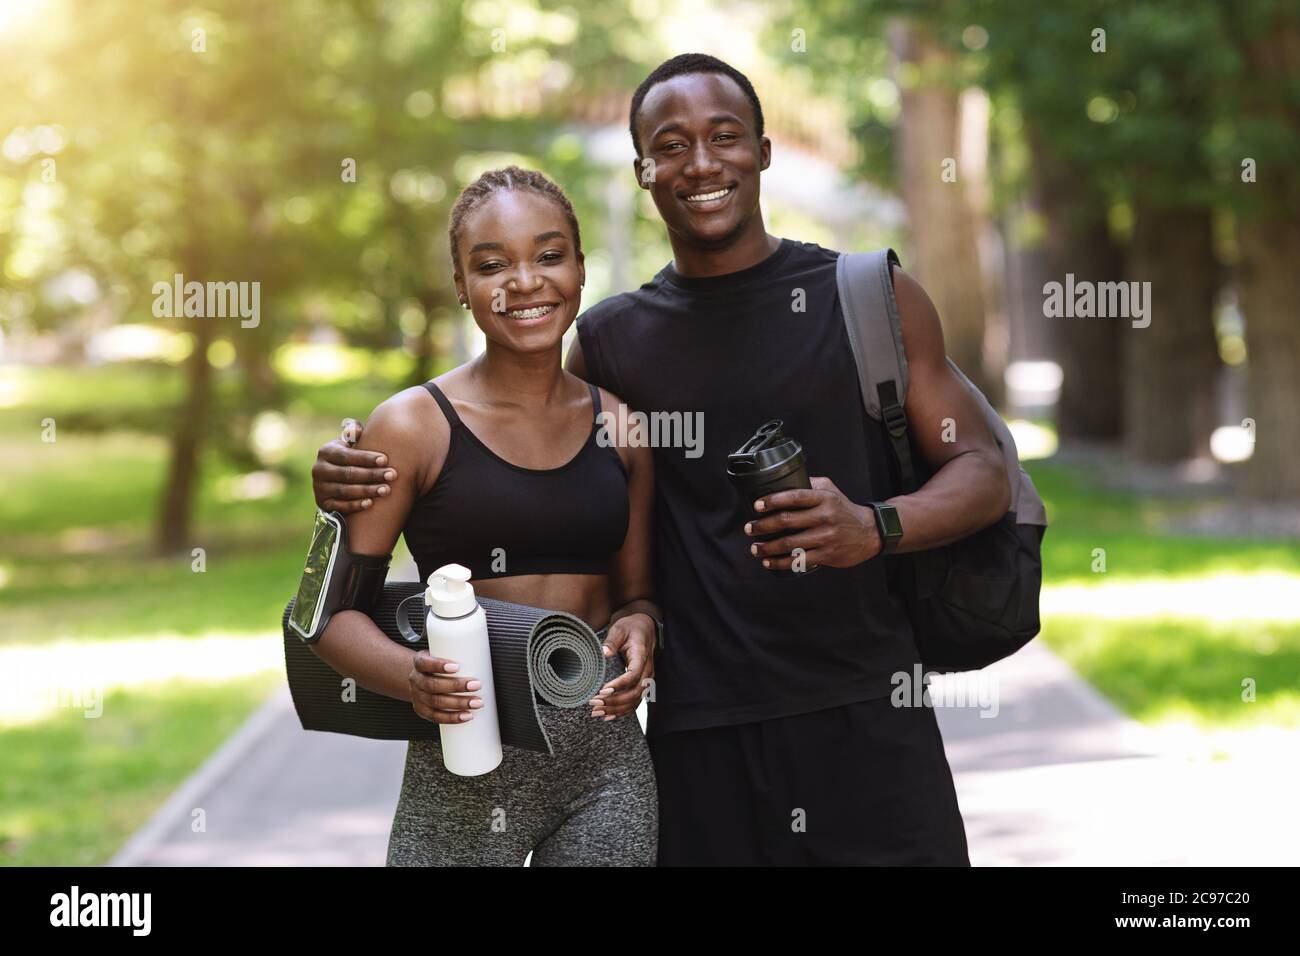 Fit Black Couple In Sportswear Posing Together After Training Outdoors In  Park Stock Photo - Alamy